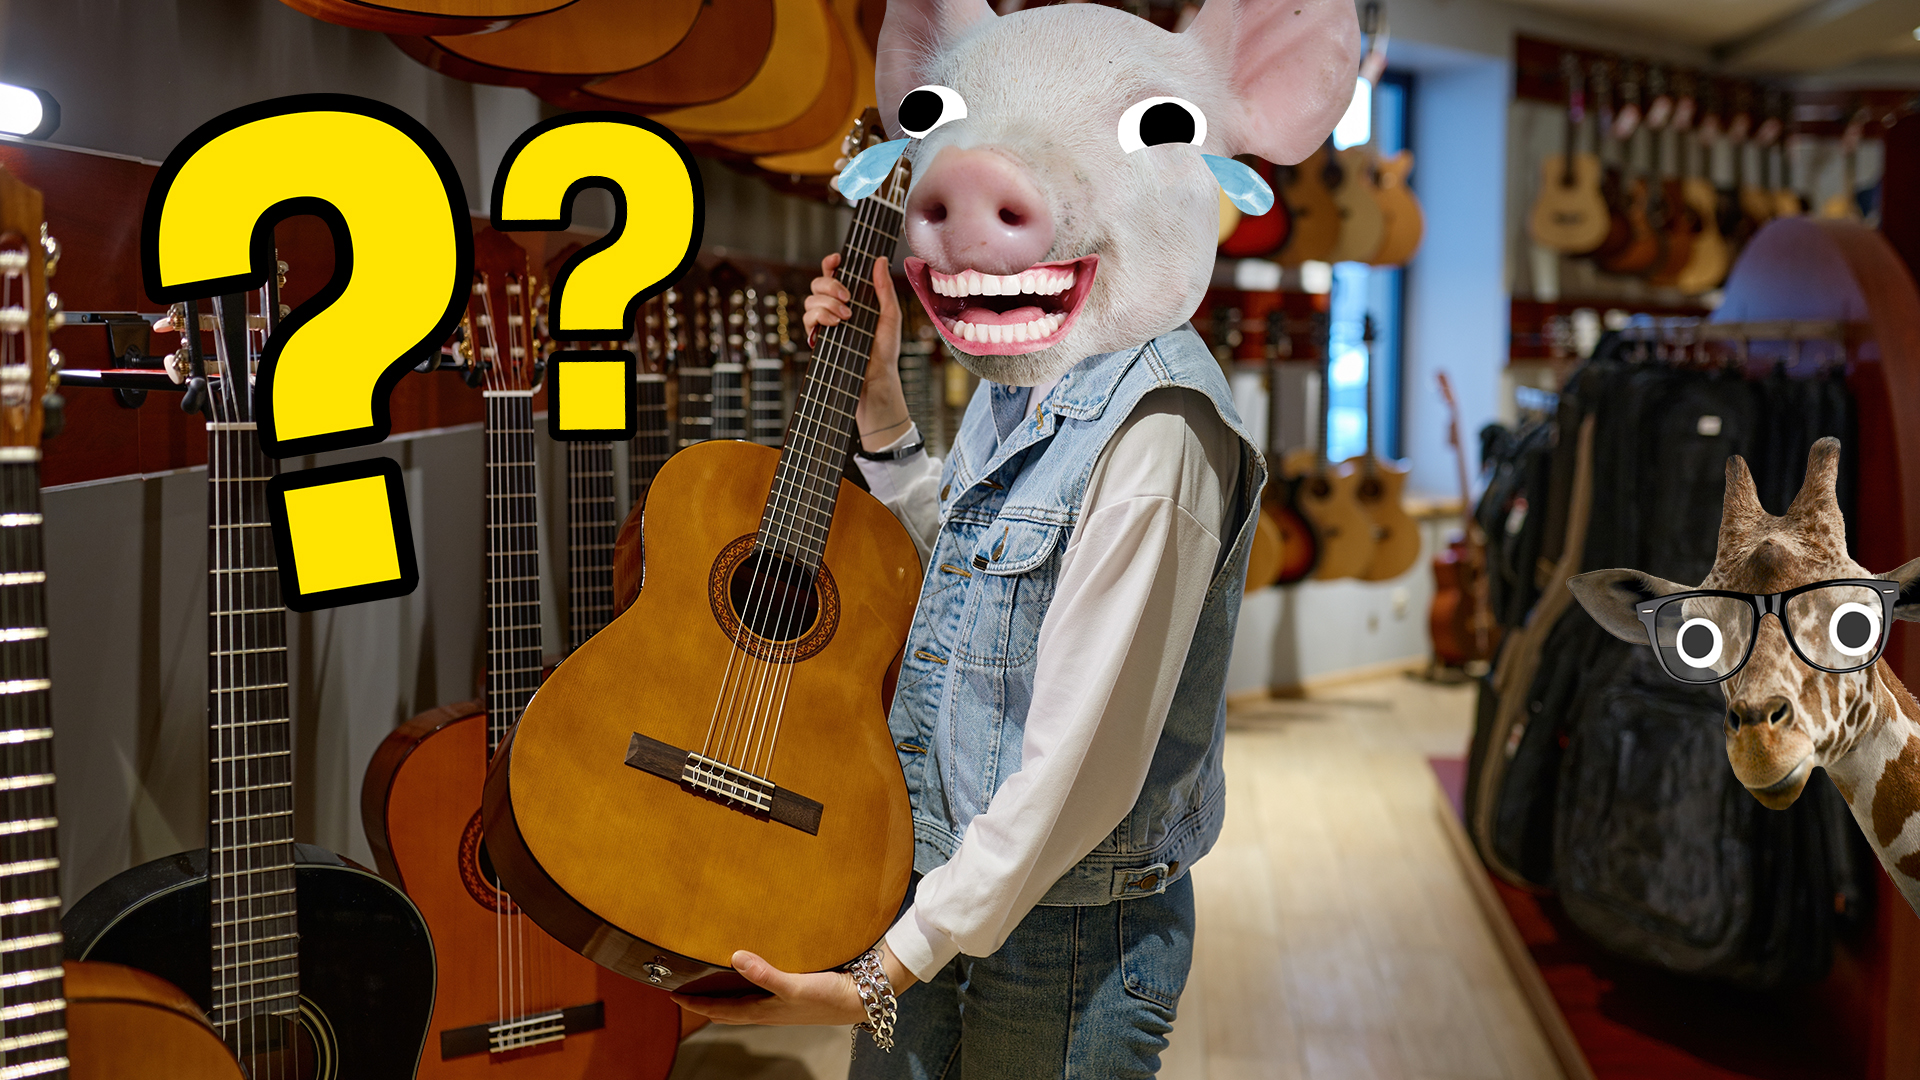 A human with the head of a pig looks at an acoustic guitar, laughing